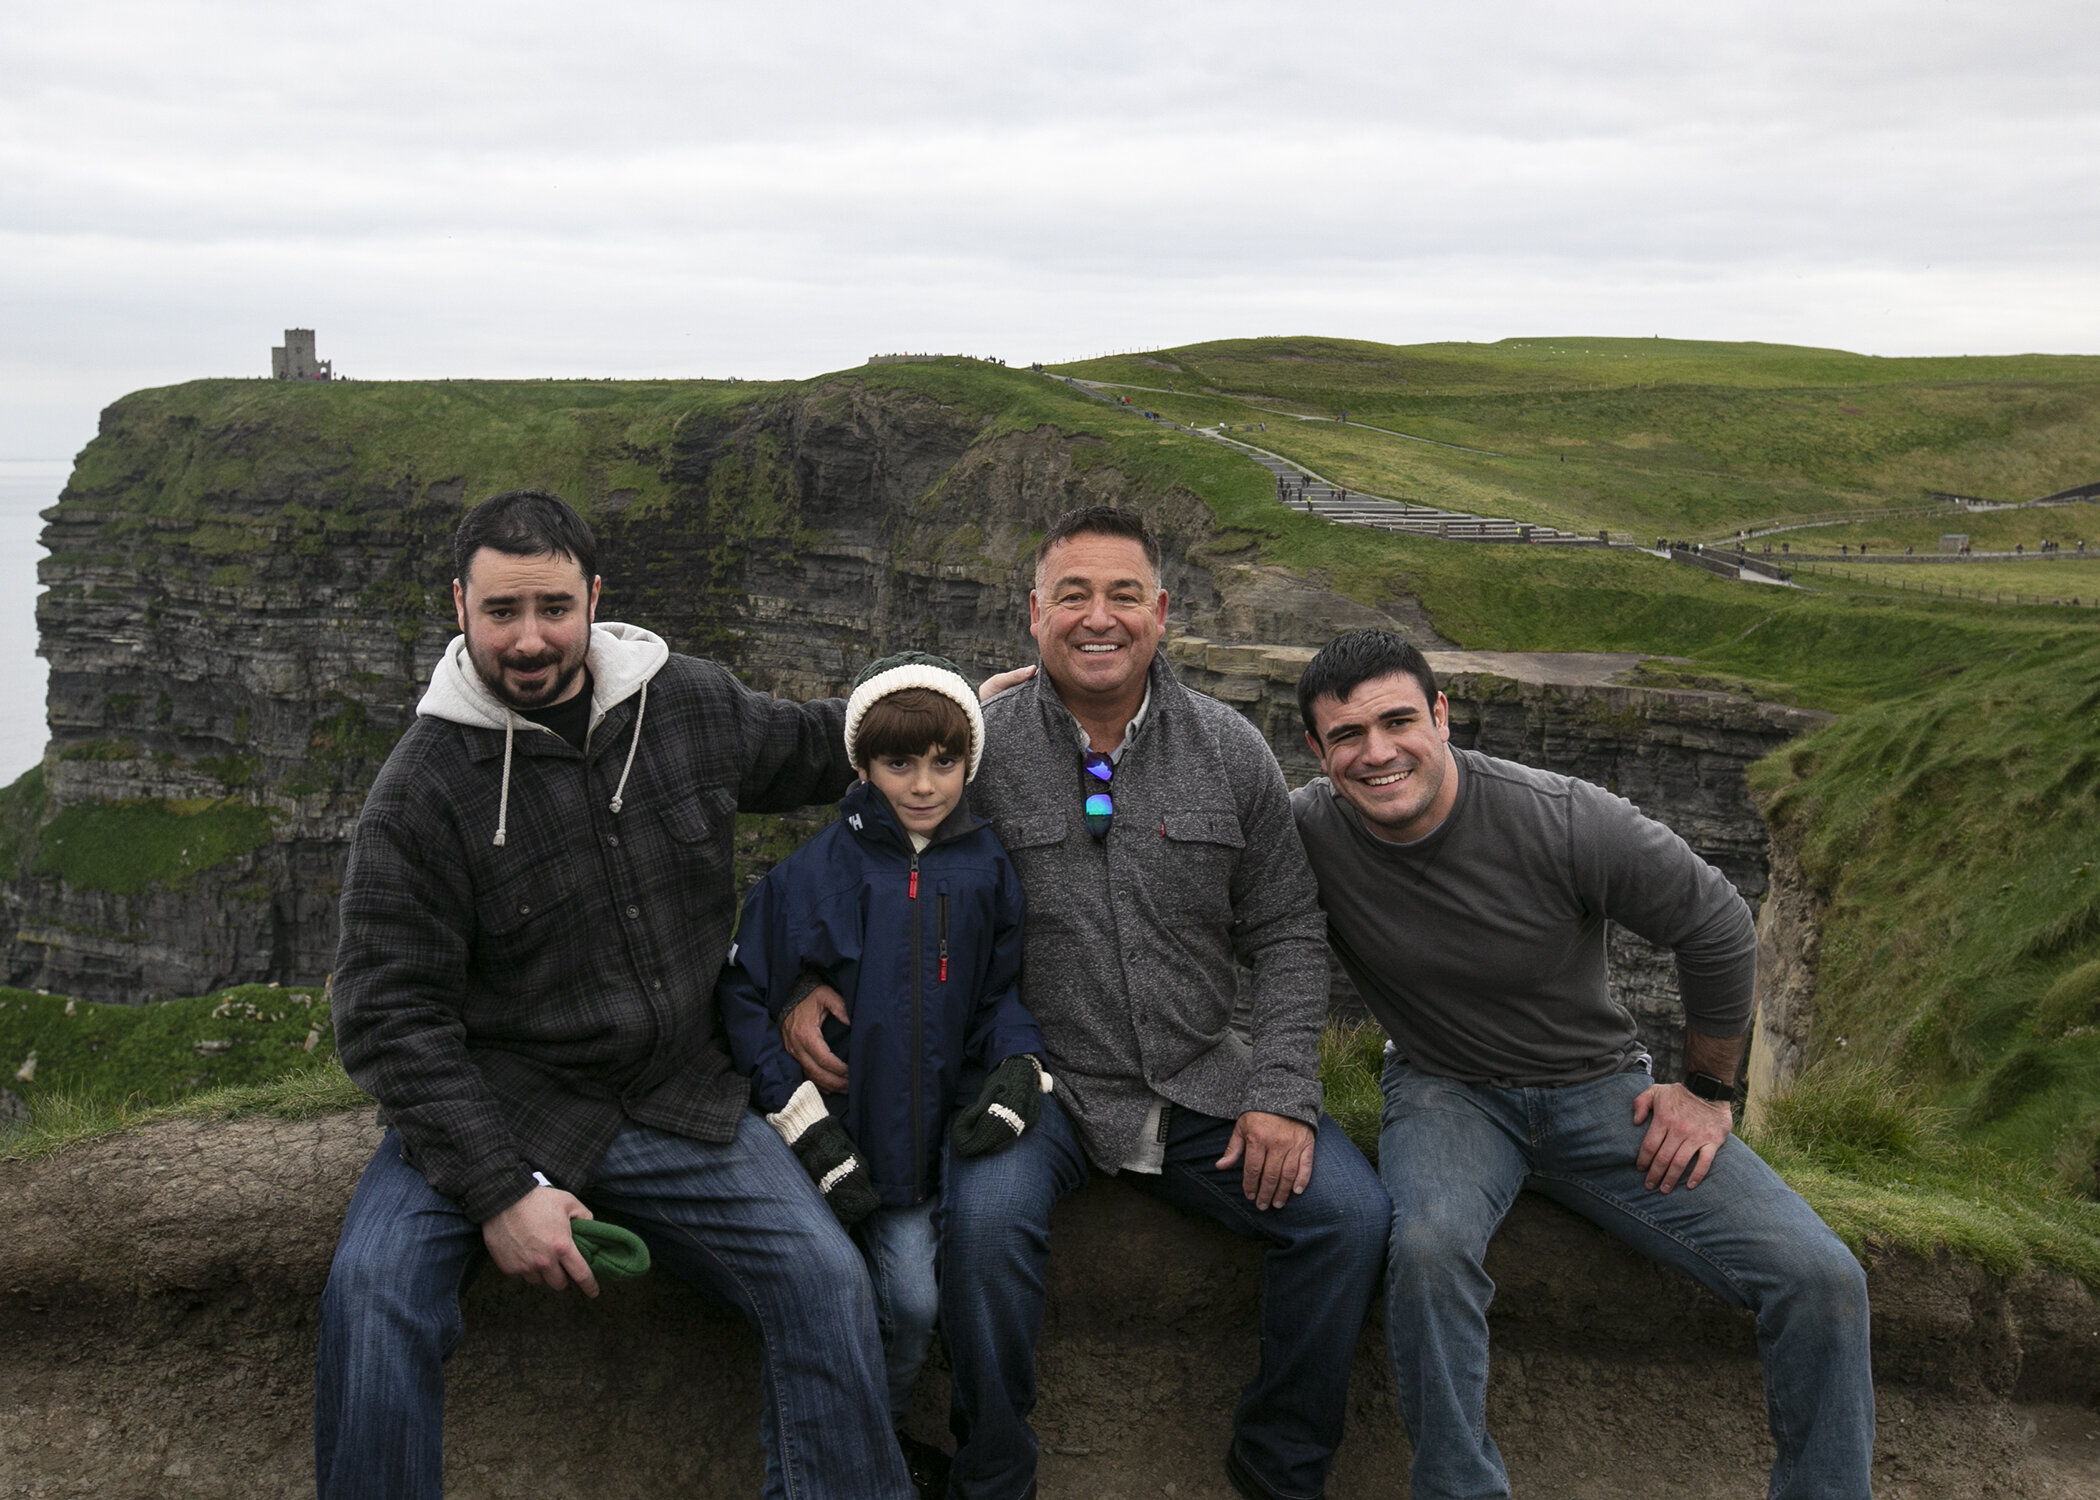 … and with his father, Jimmy, and brothers, Luke and Anthony.